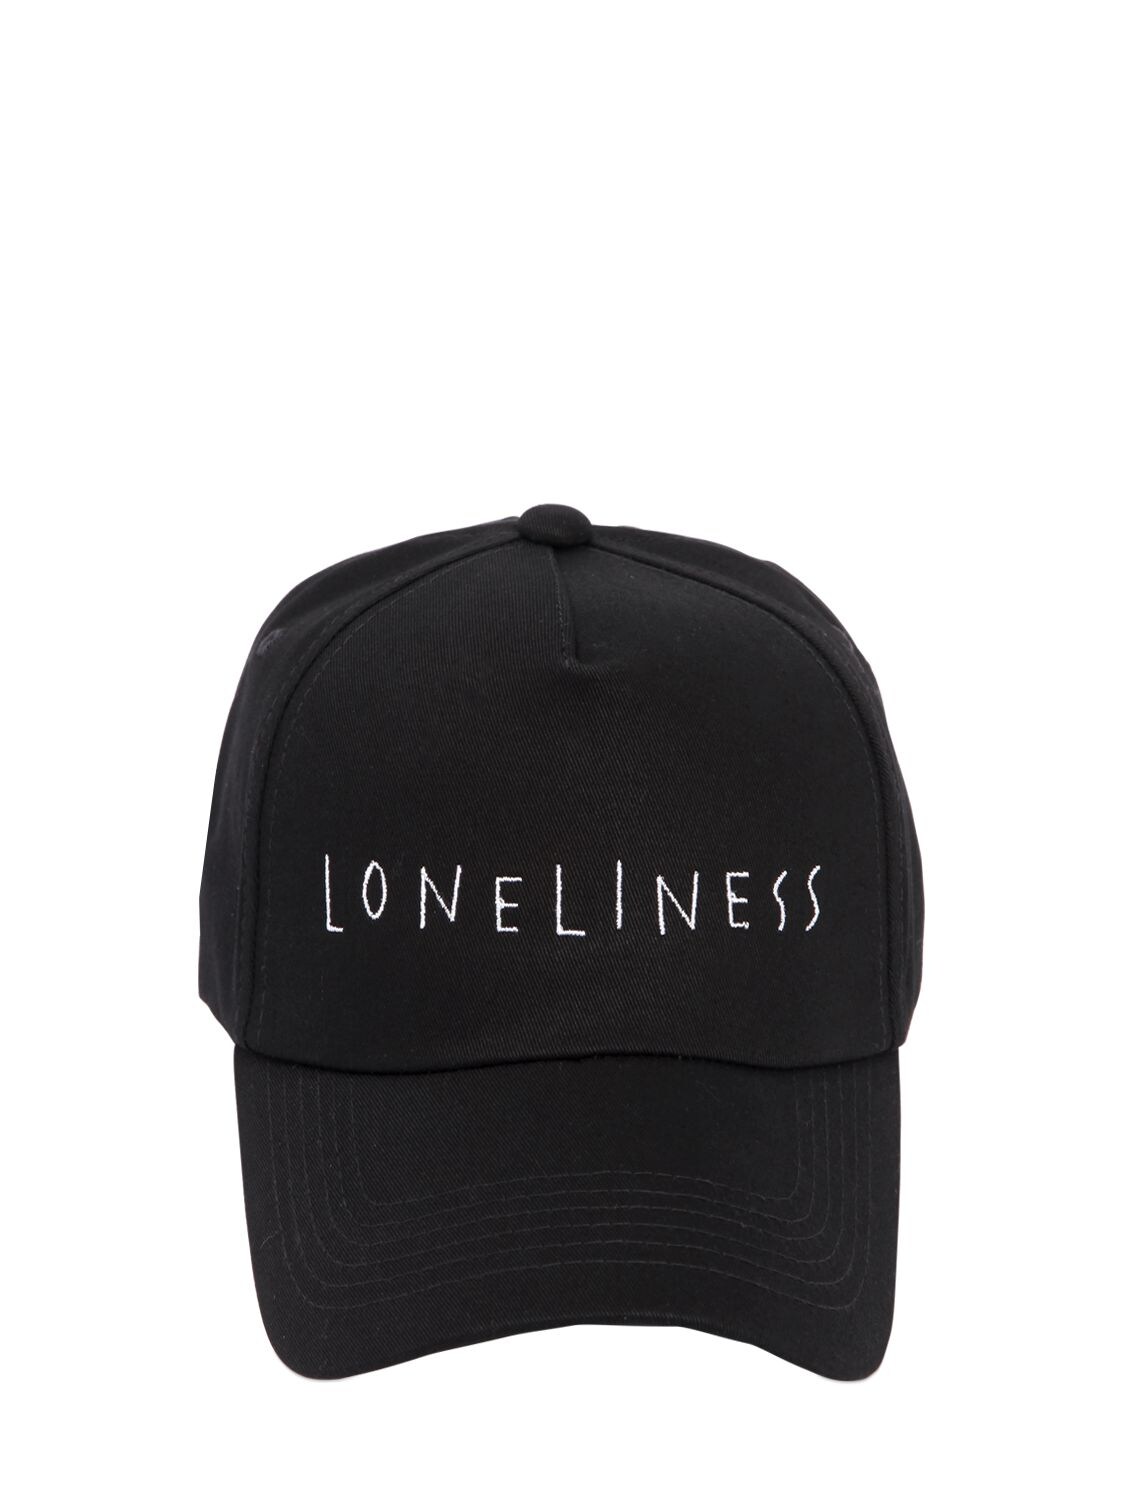 Azs Tokyo Loneliness Embroidered Baseball Hat In Black